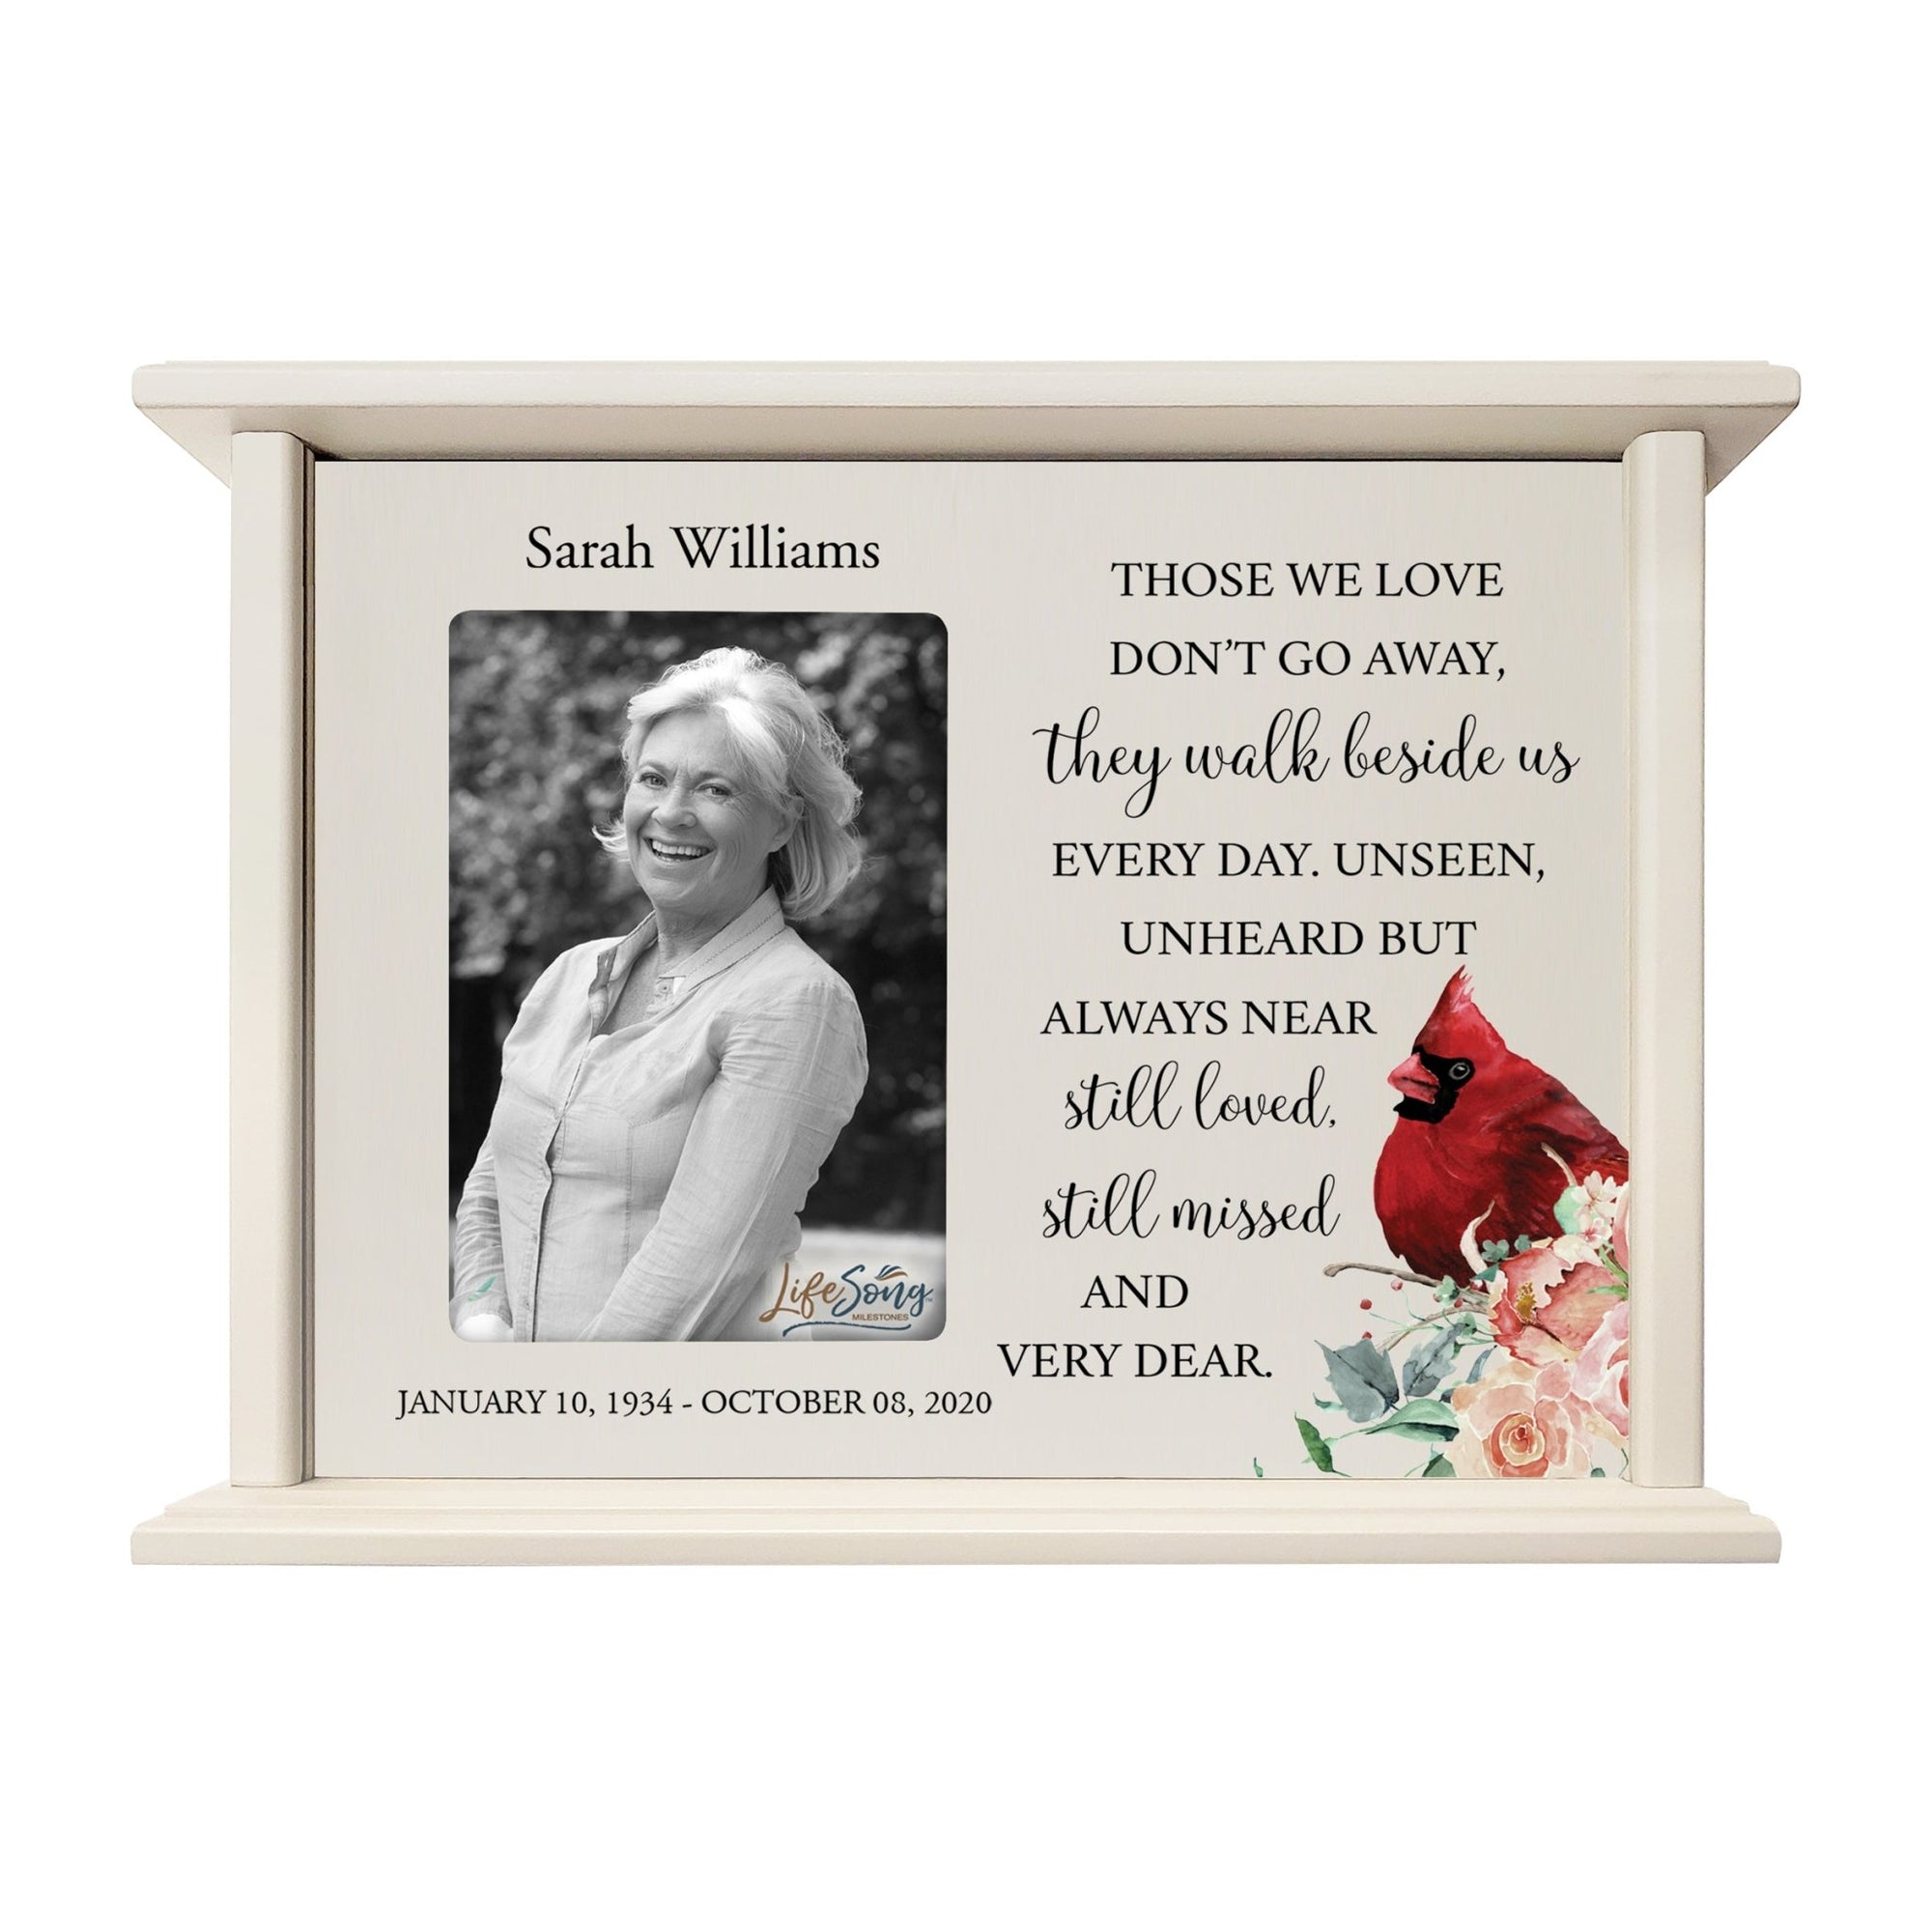 Customized Memorial Cremation Urn Wooden Urn Box with 4x6 Photo holds 200 cu in Those We Love - LifeSong Milestones